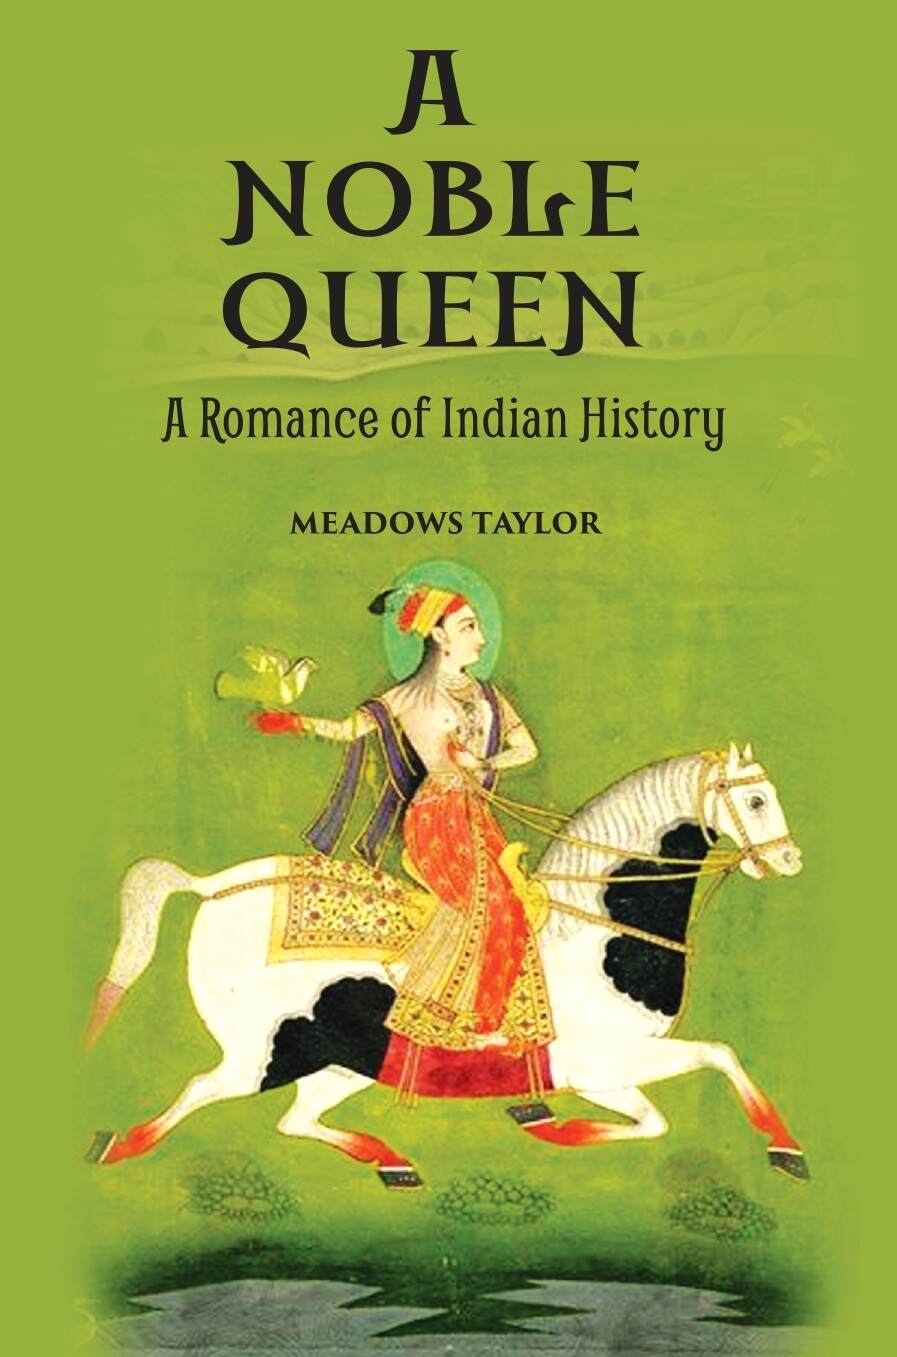 A Noble Queena Romance Of Indian History: A Romance of Indian History